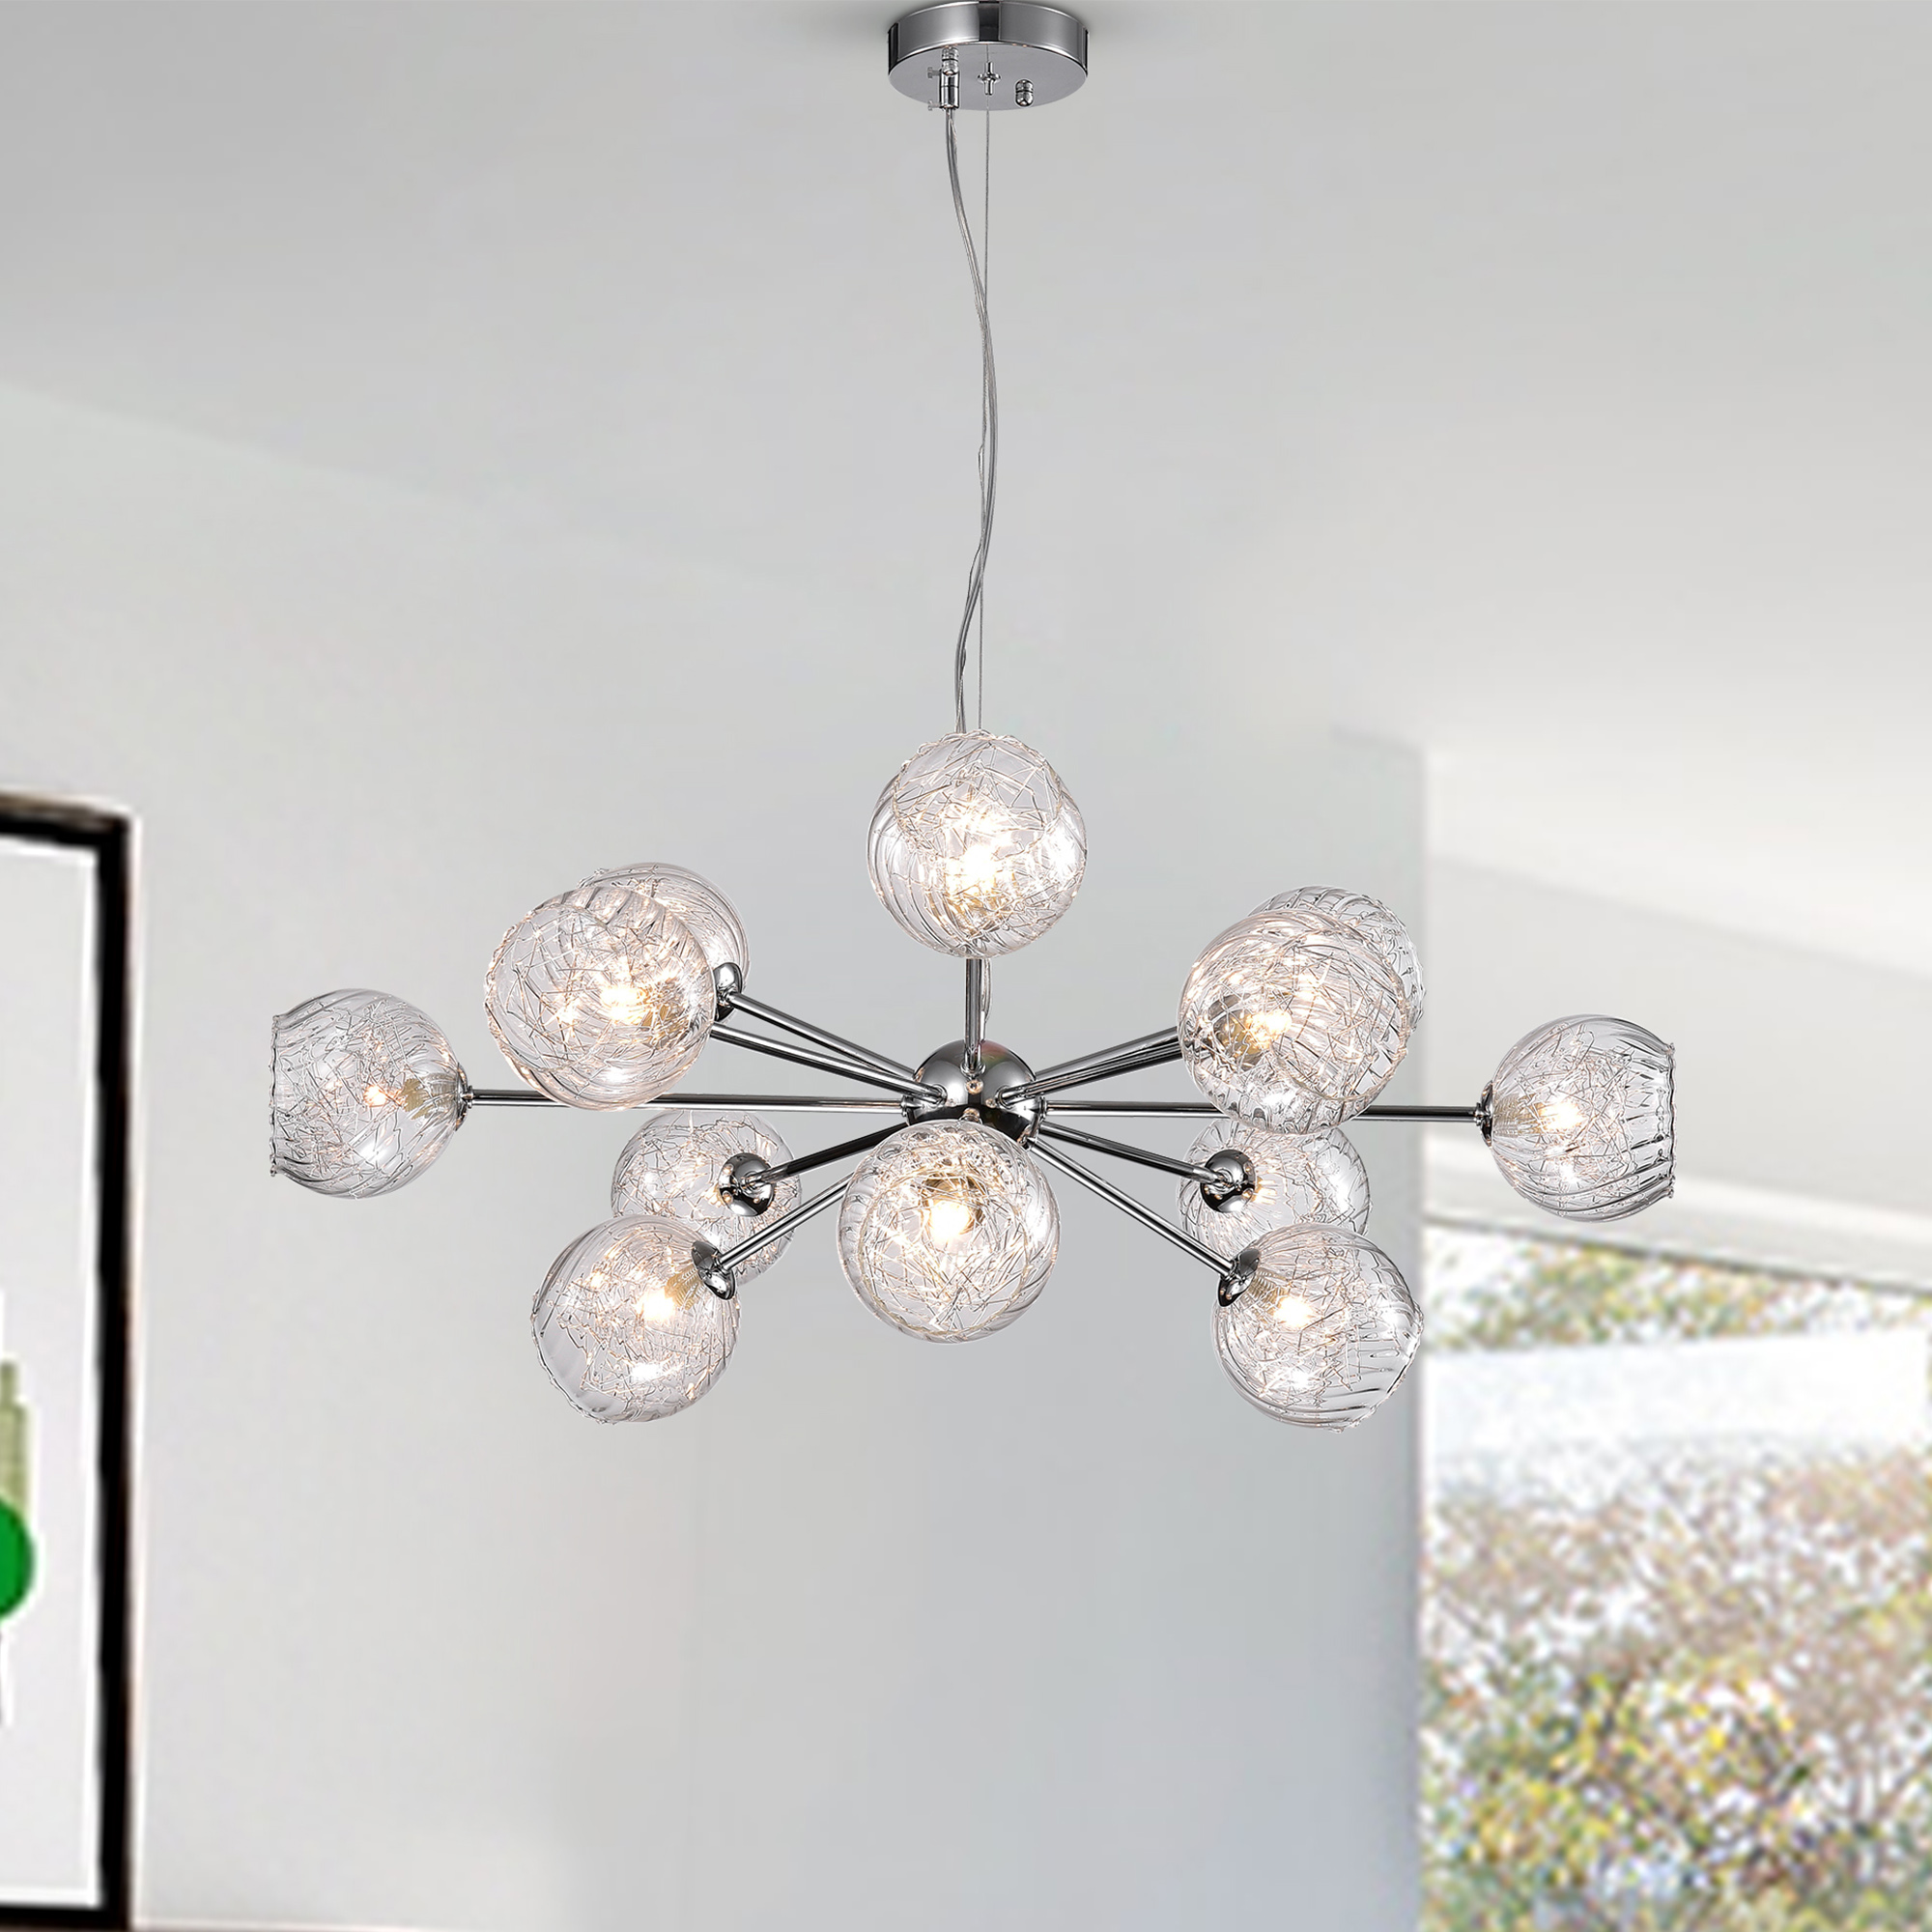 Ginherd Chrome 12-Light Satellite Chandelier with Clear Twisted Rib Glass Shades